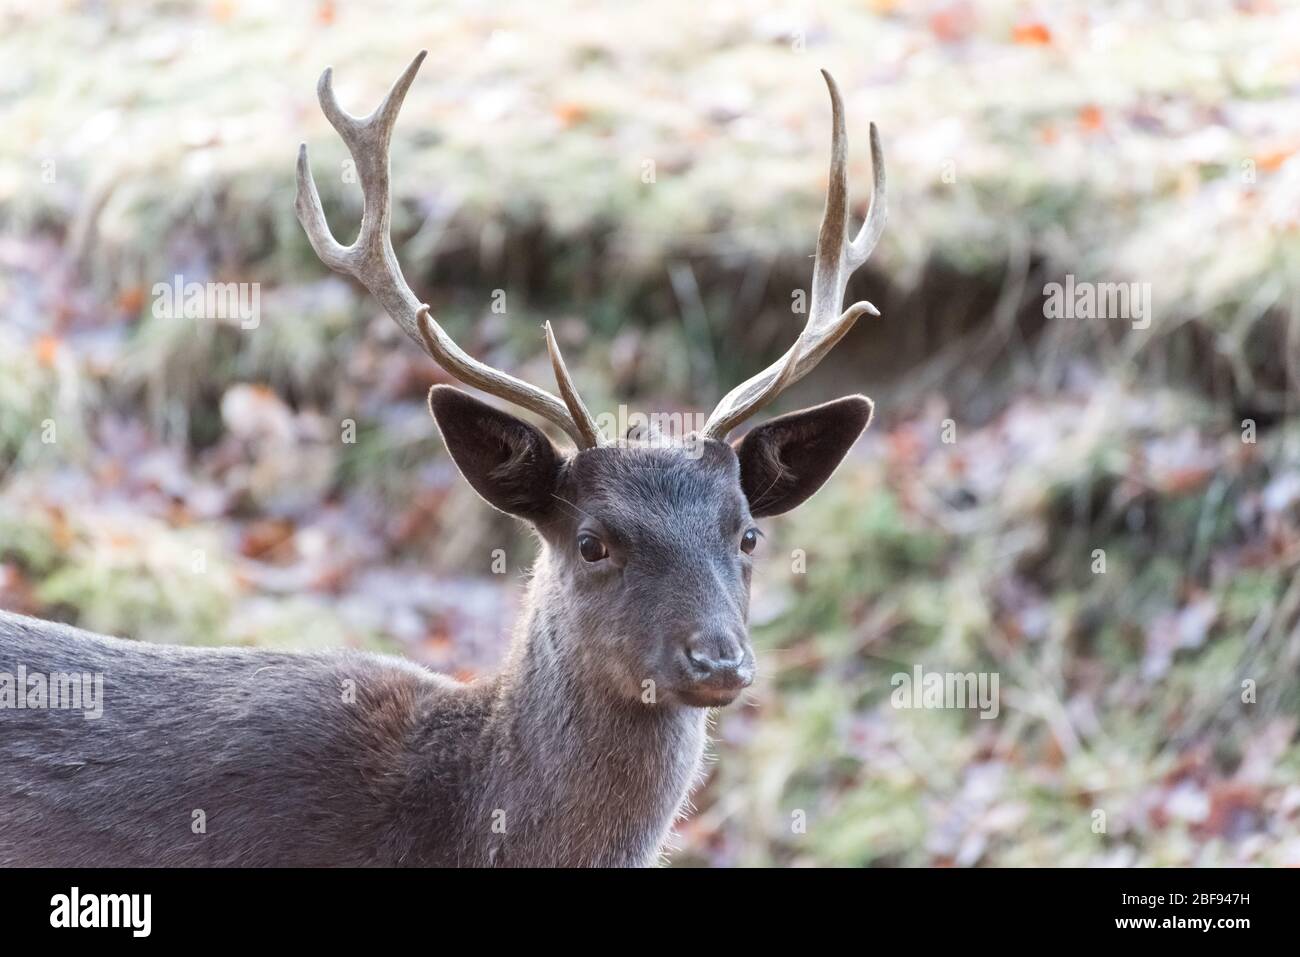 Deer, Stag, Cervidae, adult male deer on a pasture in a nature park in Germany, Western Europe Stock Photo